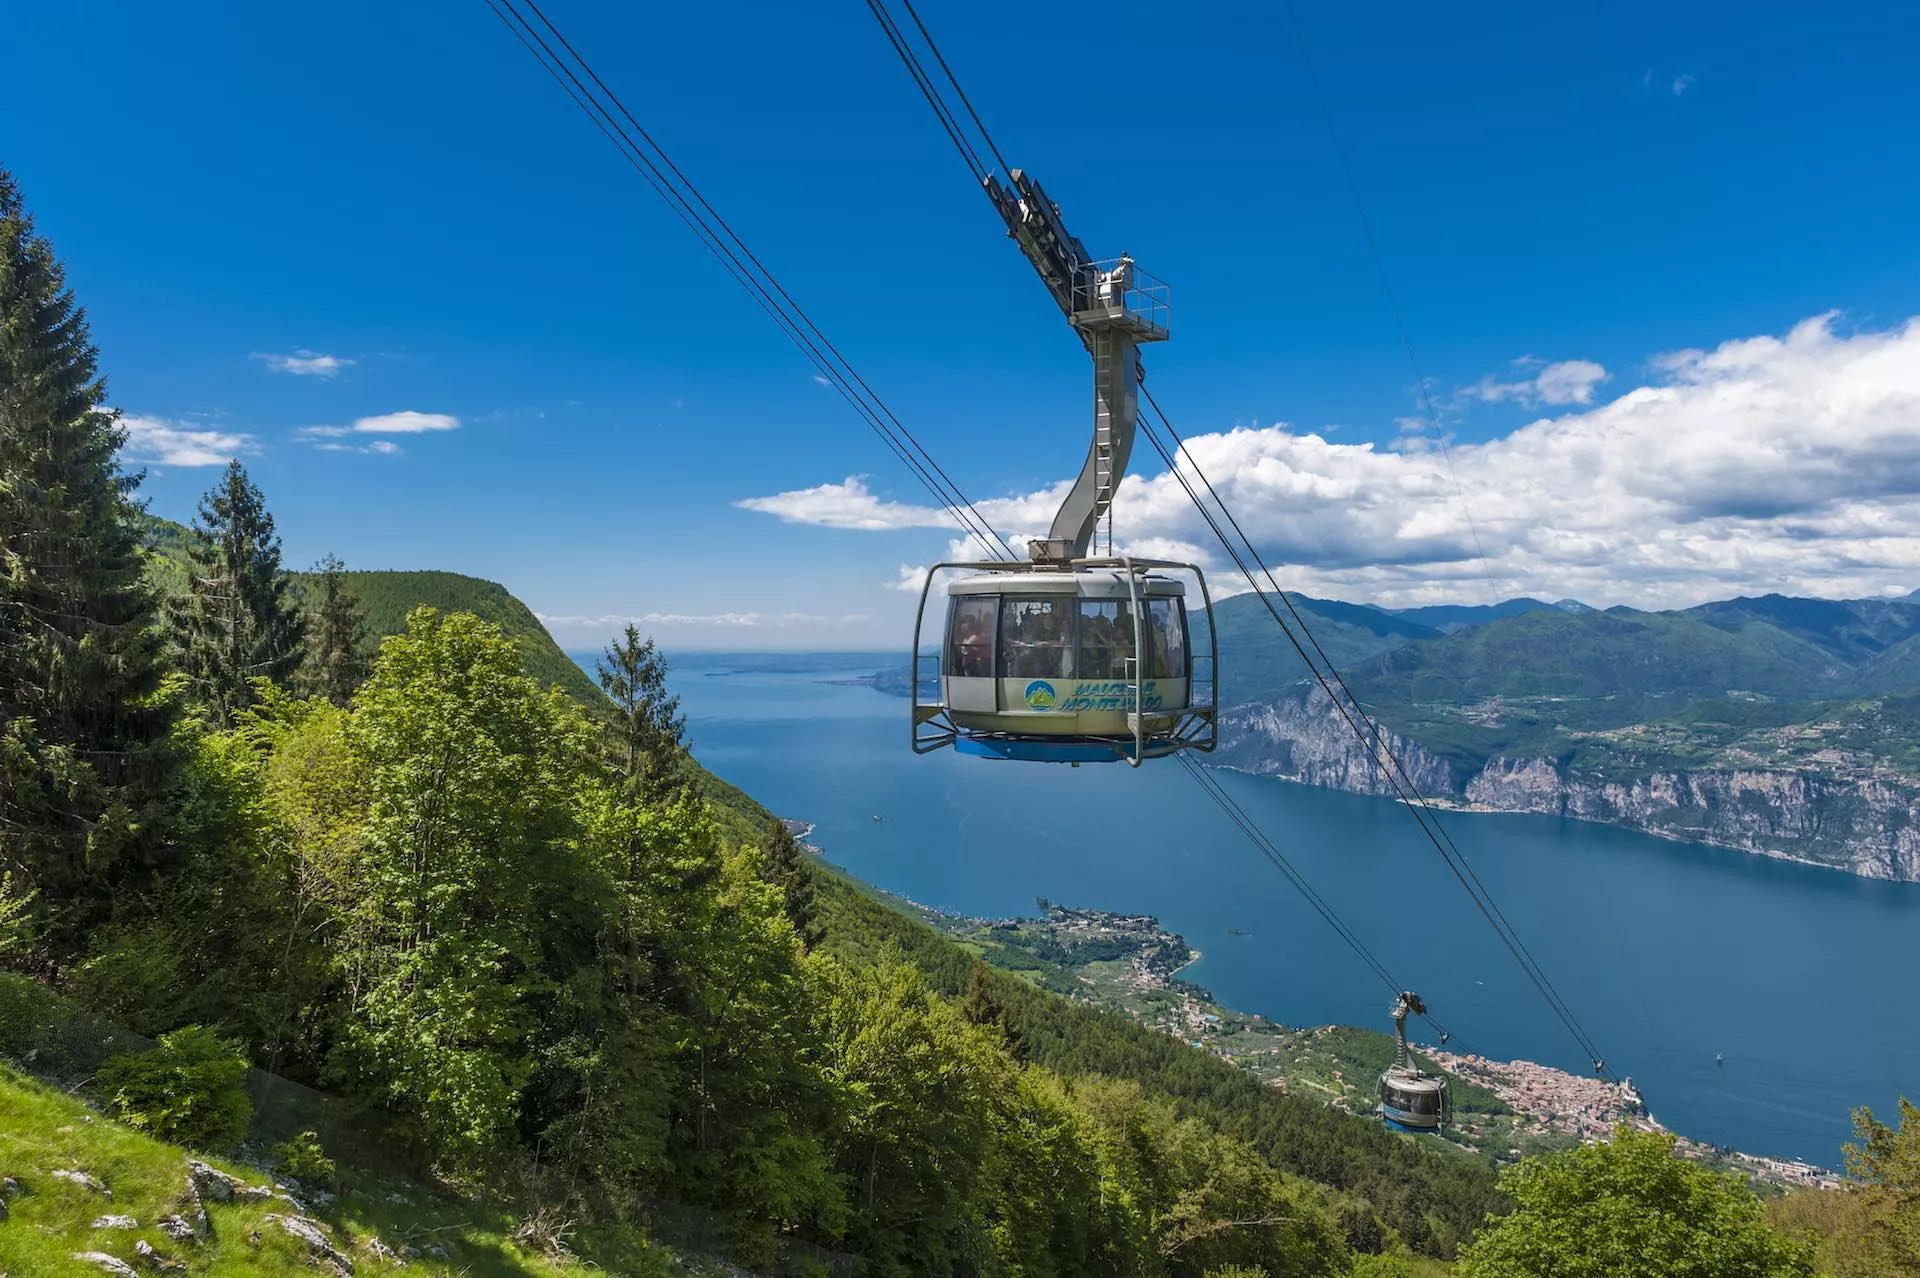 Midstation SB Malcesine in Italy, Europe | Cable Cars - Rated 4